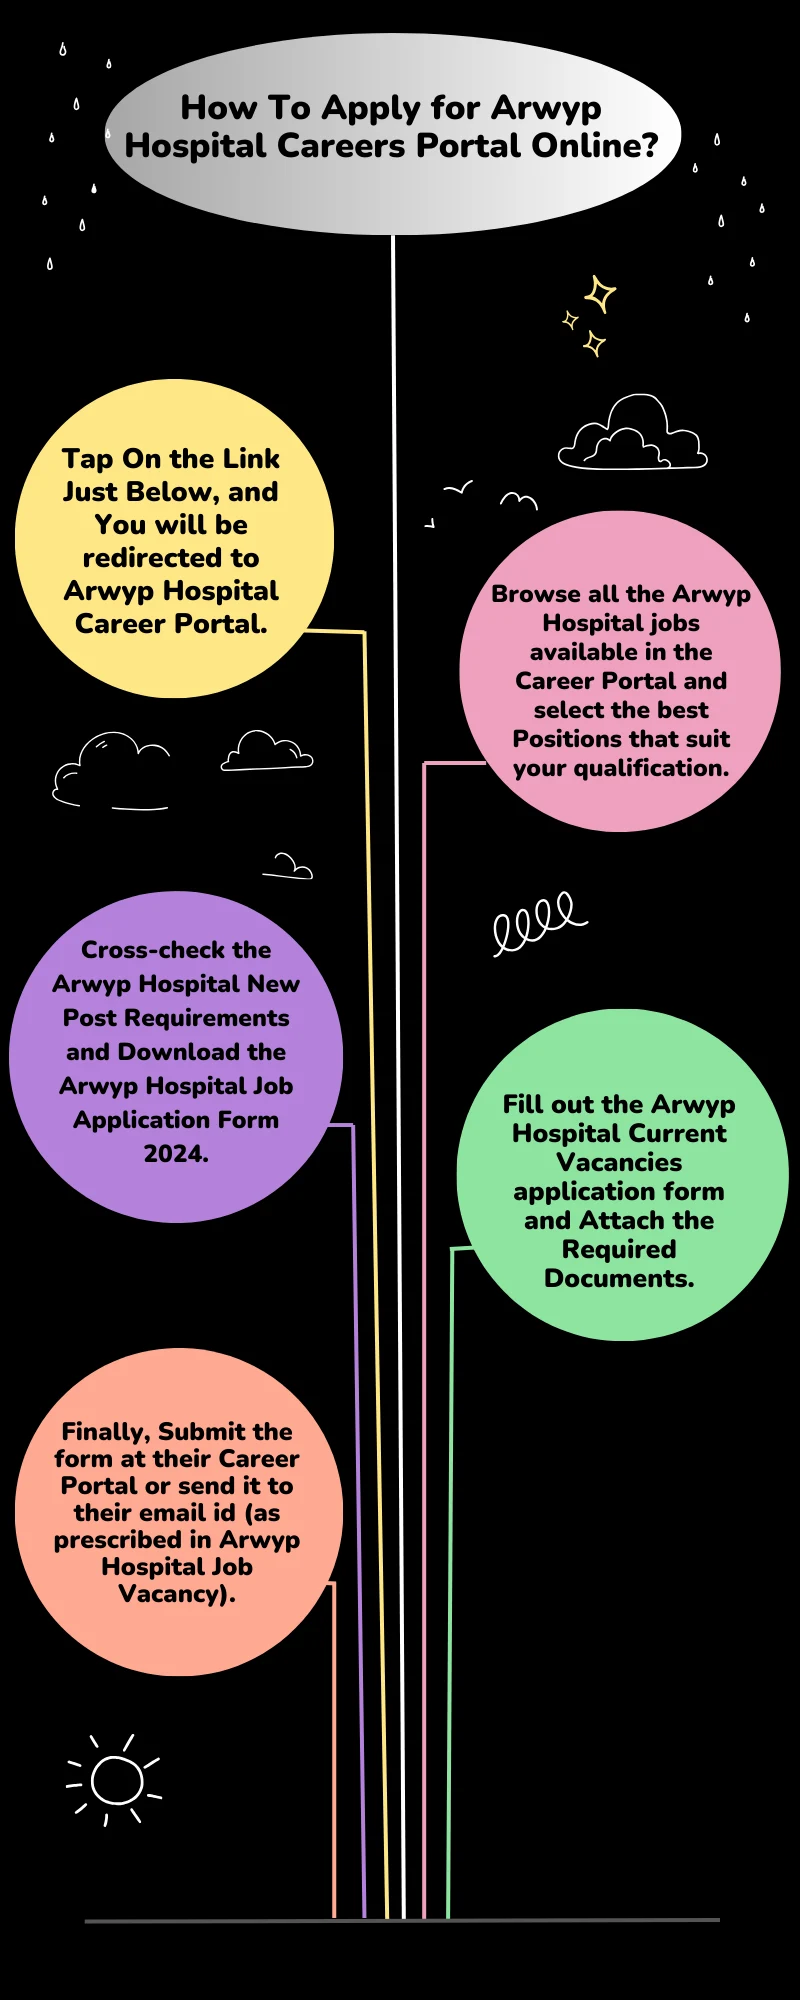 How To Apply for Arwyp Hospital Careers Portal Online?